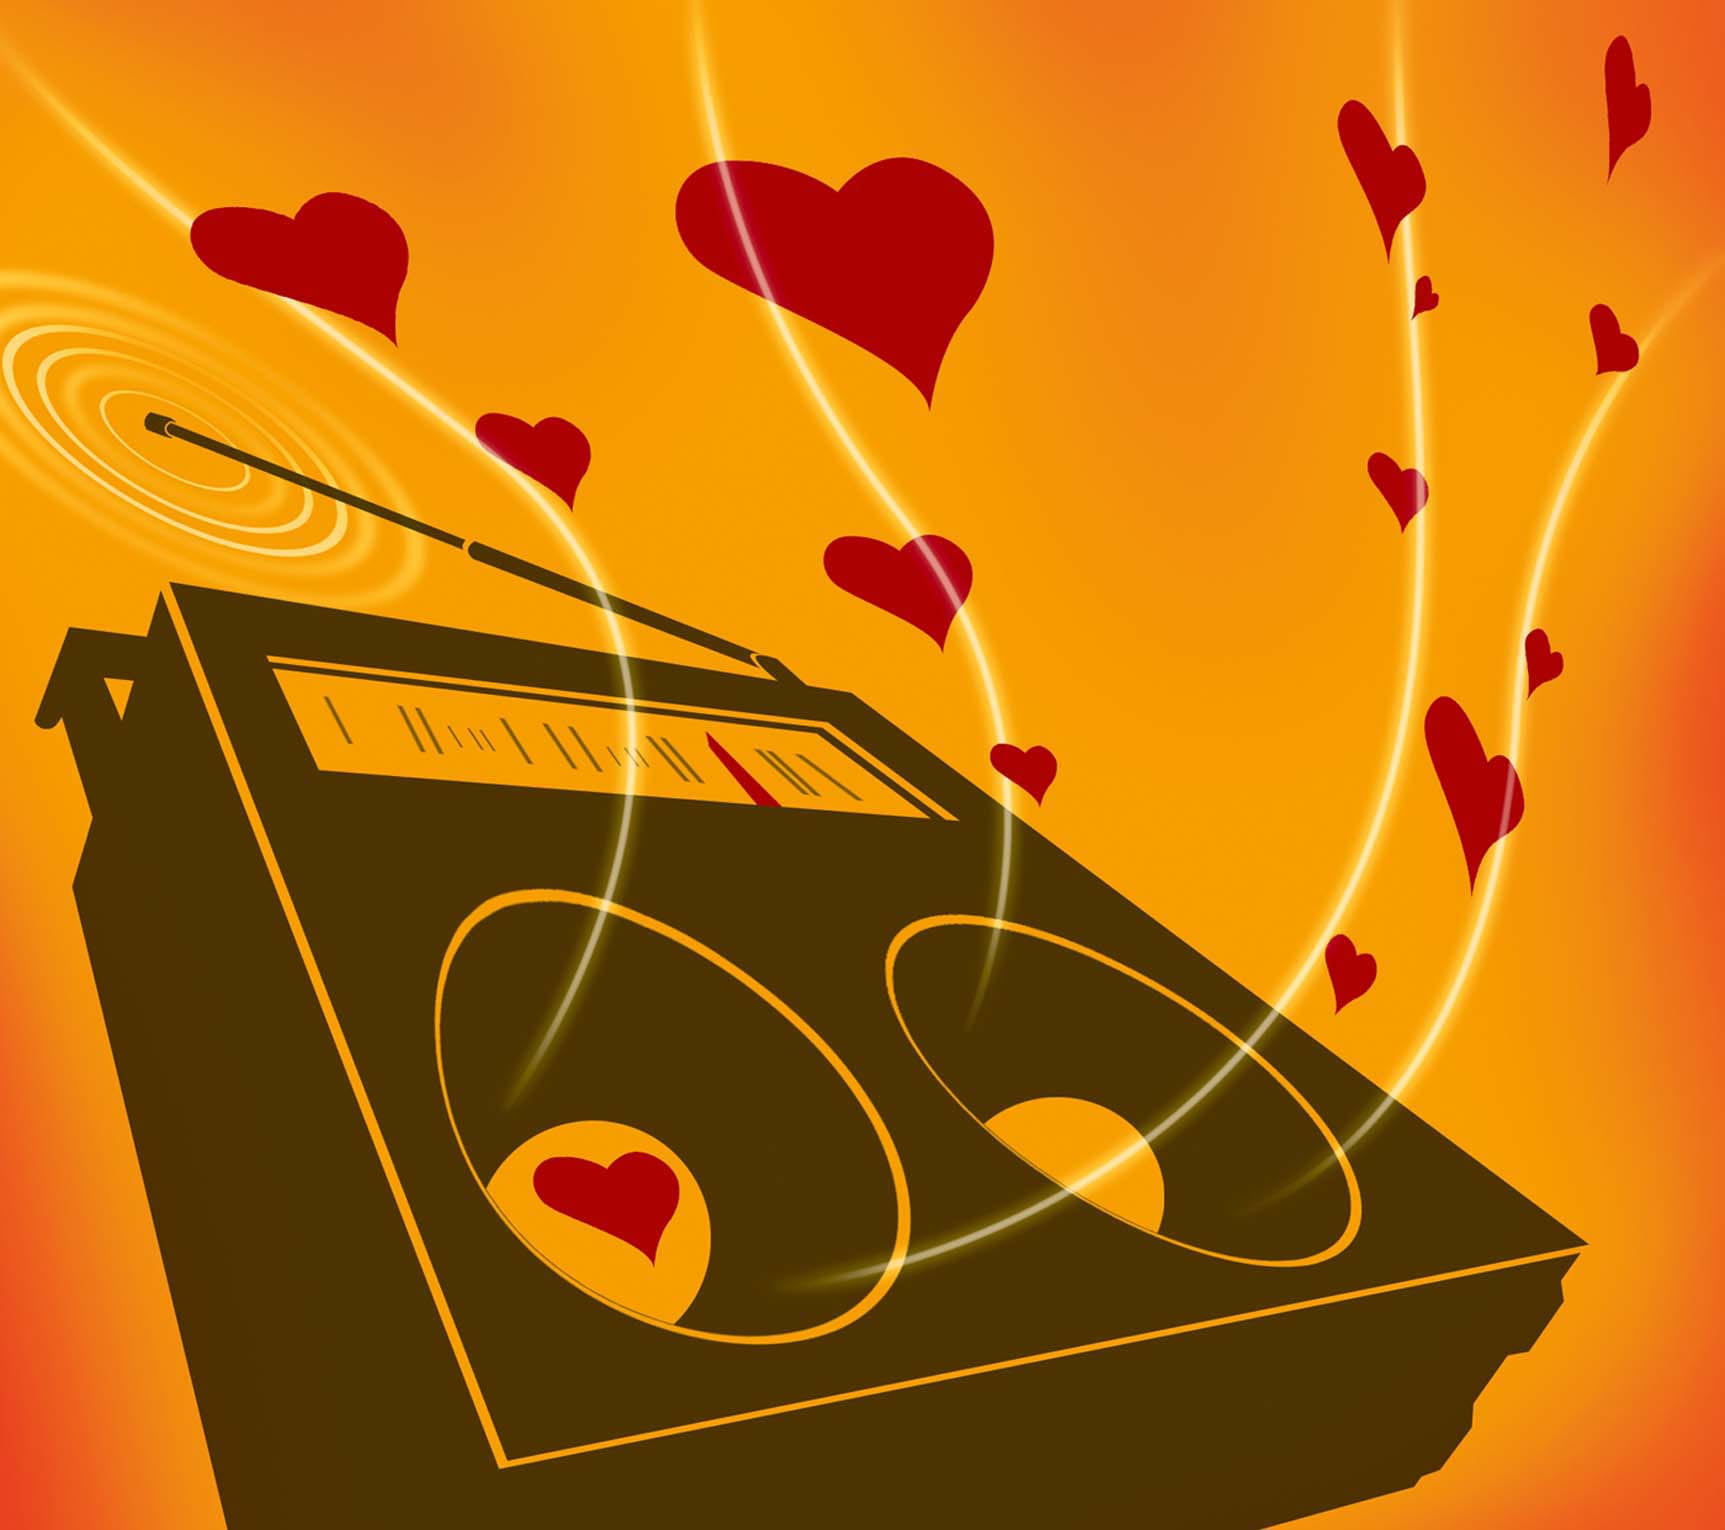 A selection of songs to curate the perfect playlist for any and all Valentine's Day occasions. Credit: San Jose Mercury News 2007 [Original caption: 300 dpi Daymond Gascon color illustration of red hearts emitting from radio.]